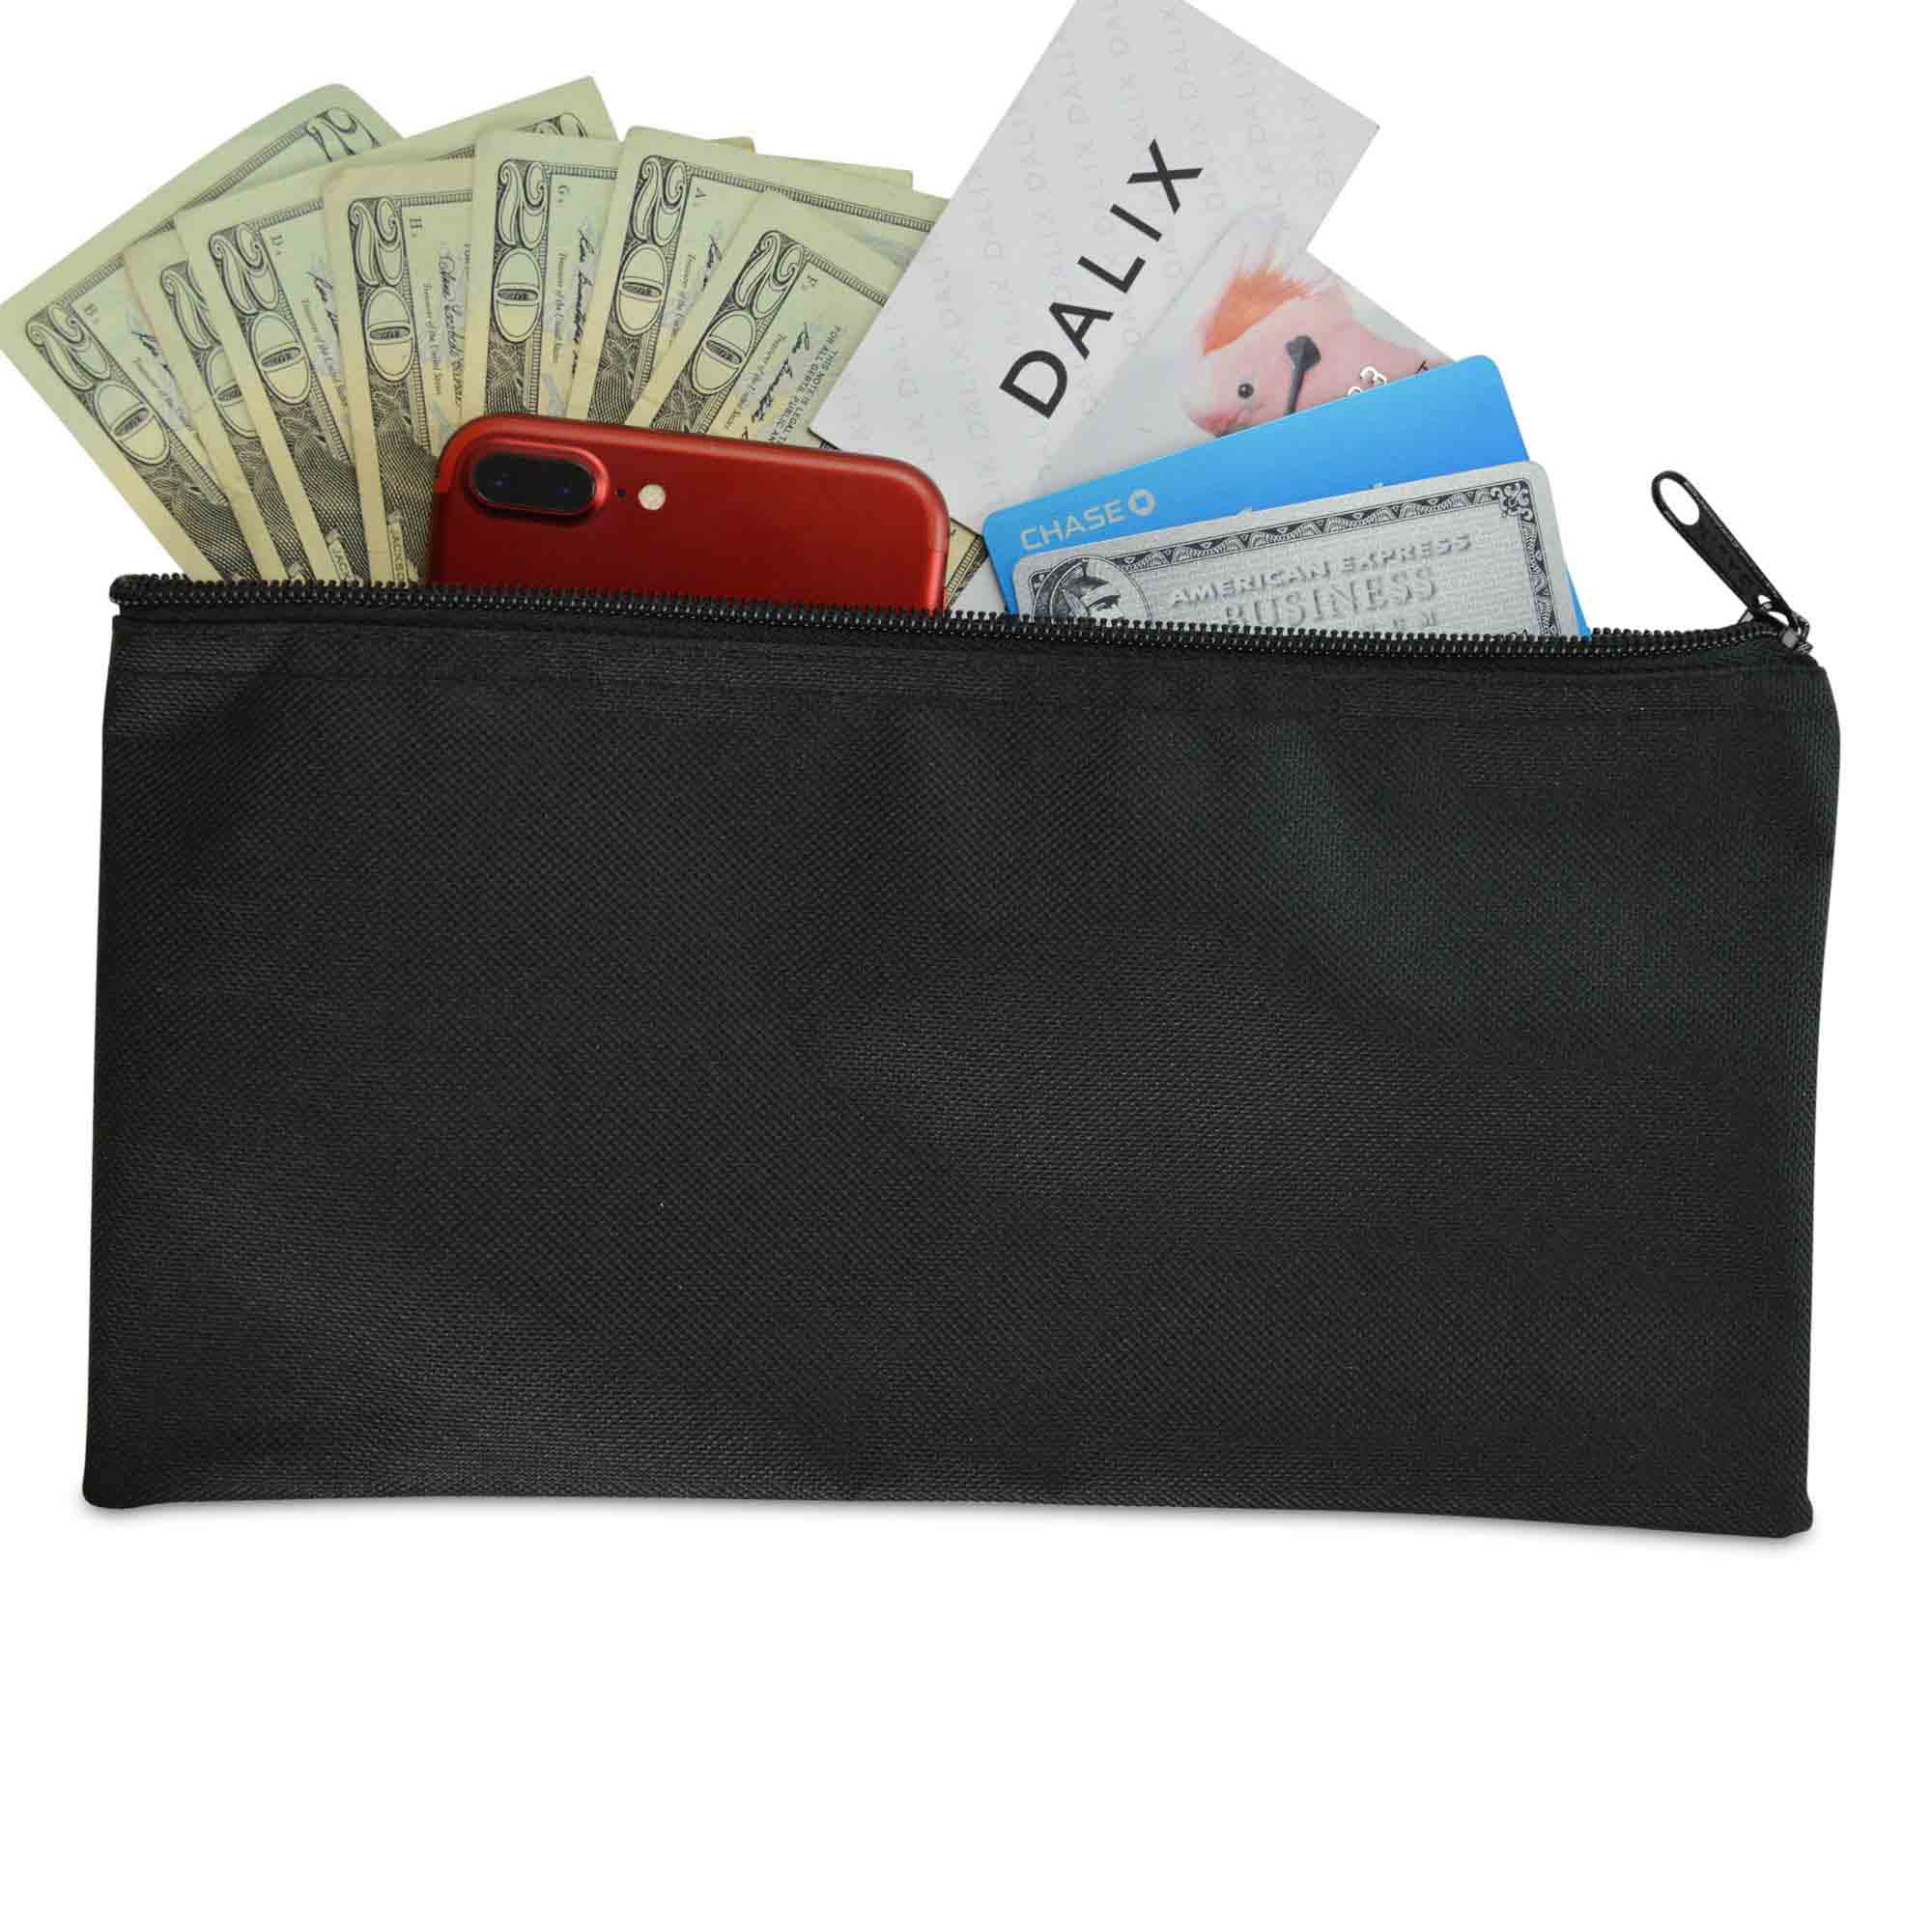 by GIDABRAND 11x6 inch Durable Leatherette Money Cash Coin Check Wallet Pouch for Men & Women with Framed ID Window and Blank Card Money Bank Deposit Bag with Zipper Navy Blue and Red 